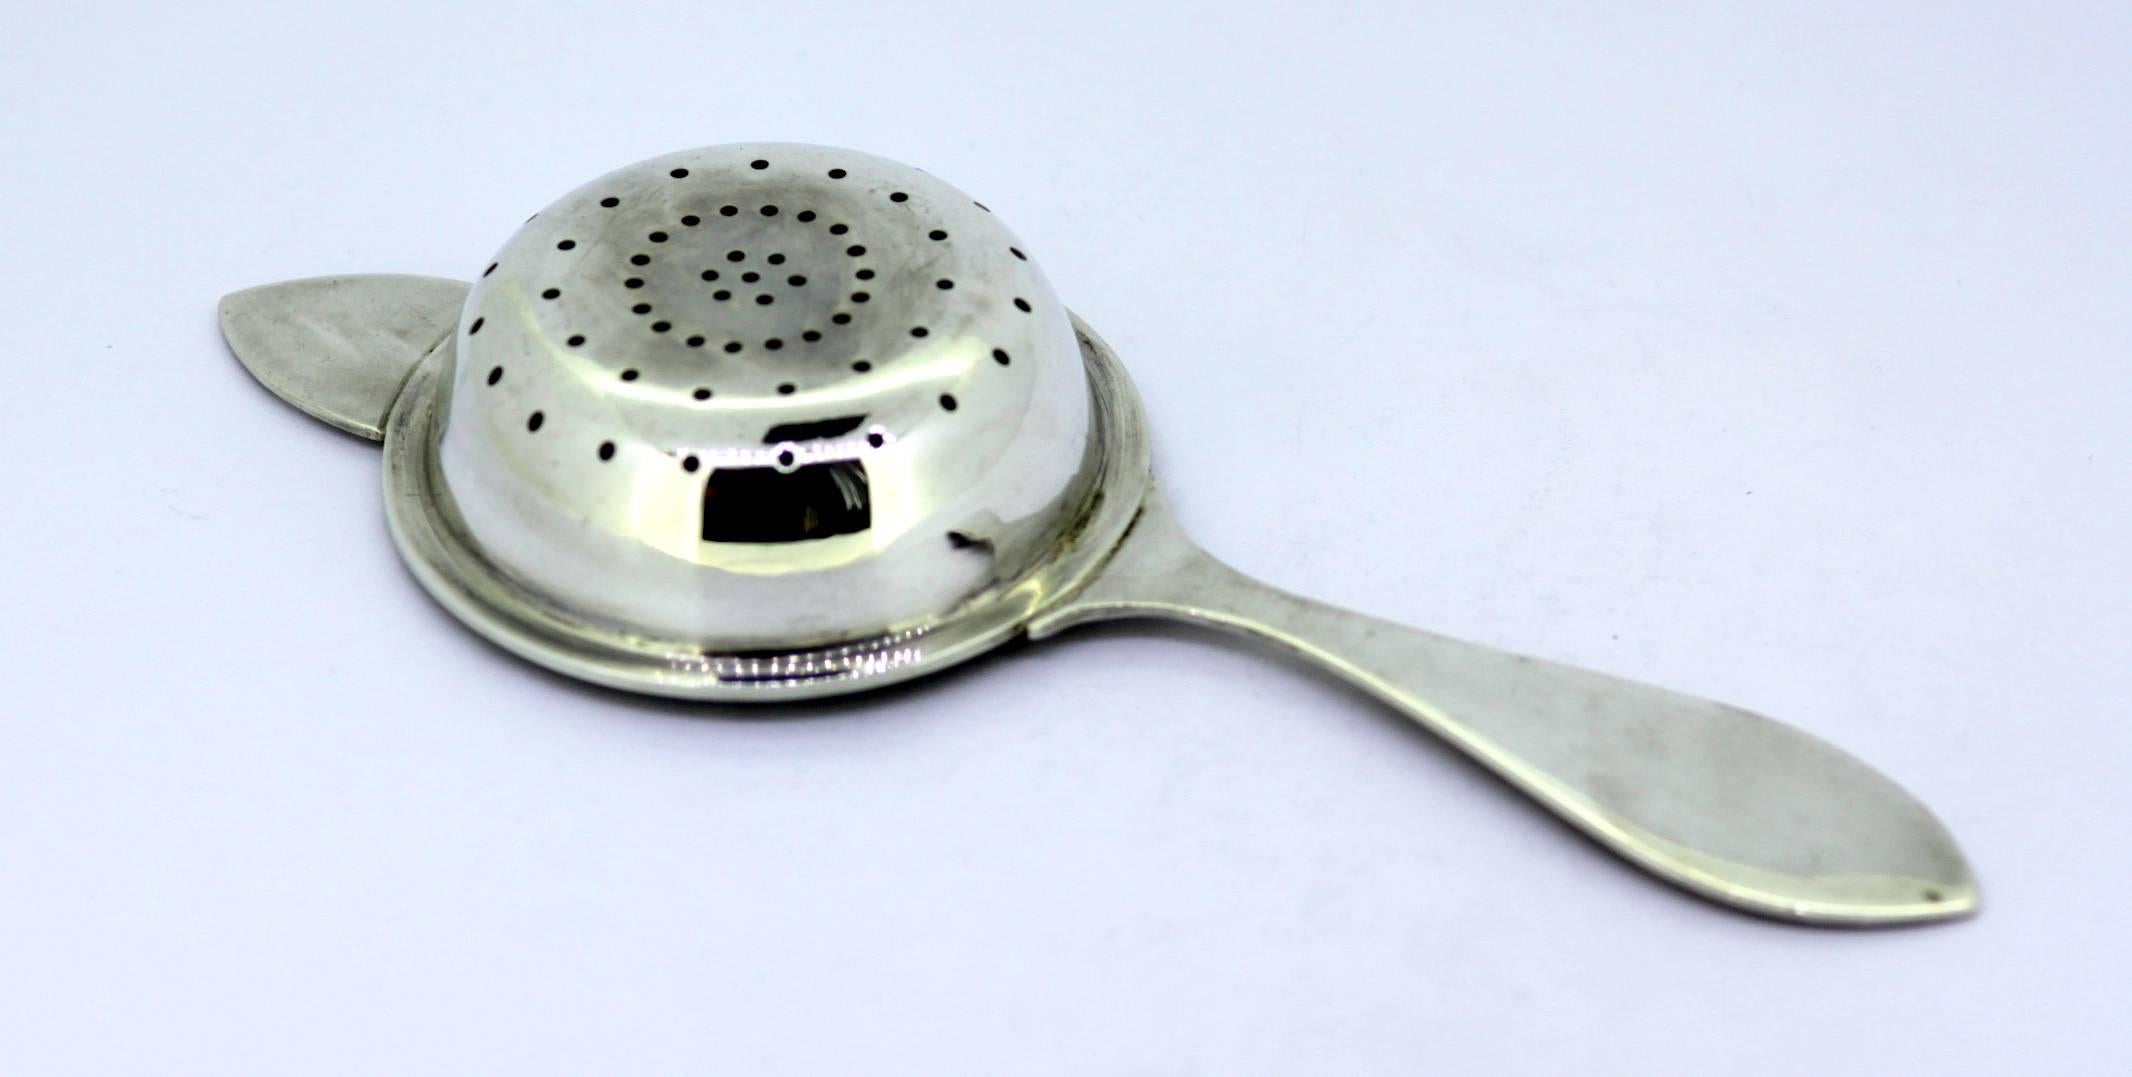 Sterling Silver Tea Strainer 
By Francis Howard Ltd 
Made in Sheffield 1942 
Fully hallmarked. 

Dimensions - 
Size : 16.3 x 6.25 x 2 cm 
Weight : 53 grams 

Condition : Surface wear and tear from general usage, overall great condition with no